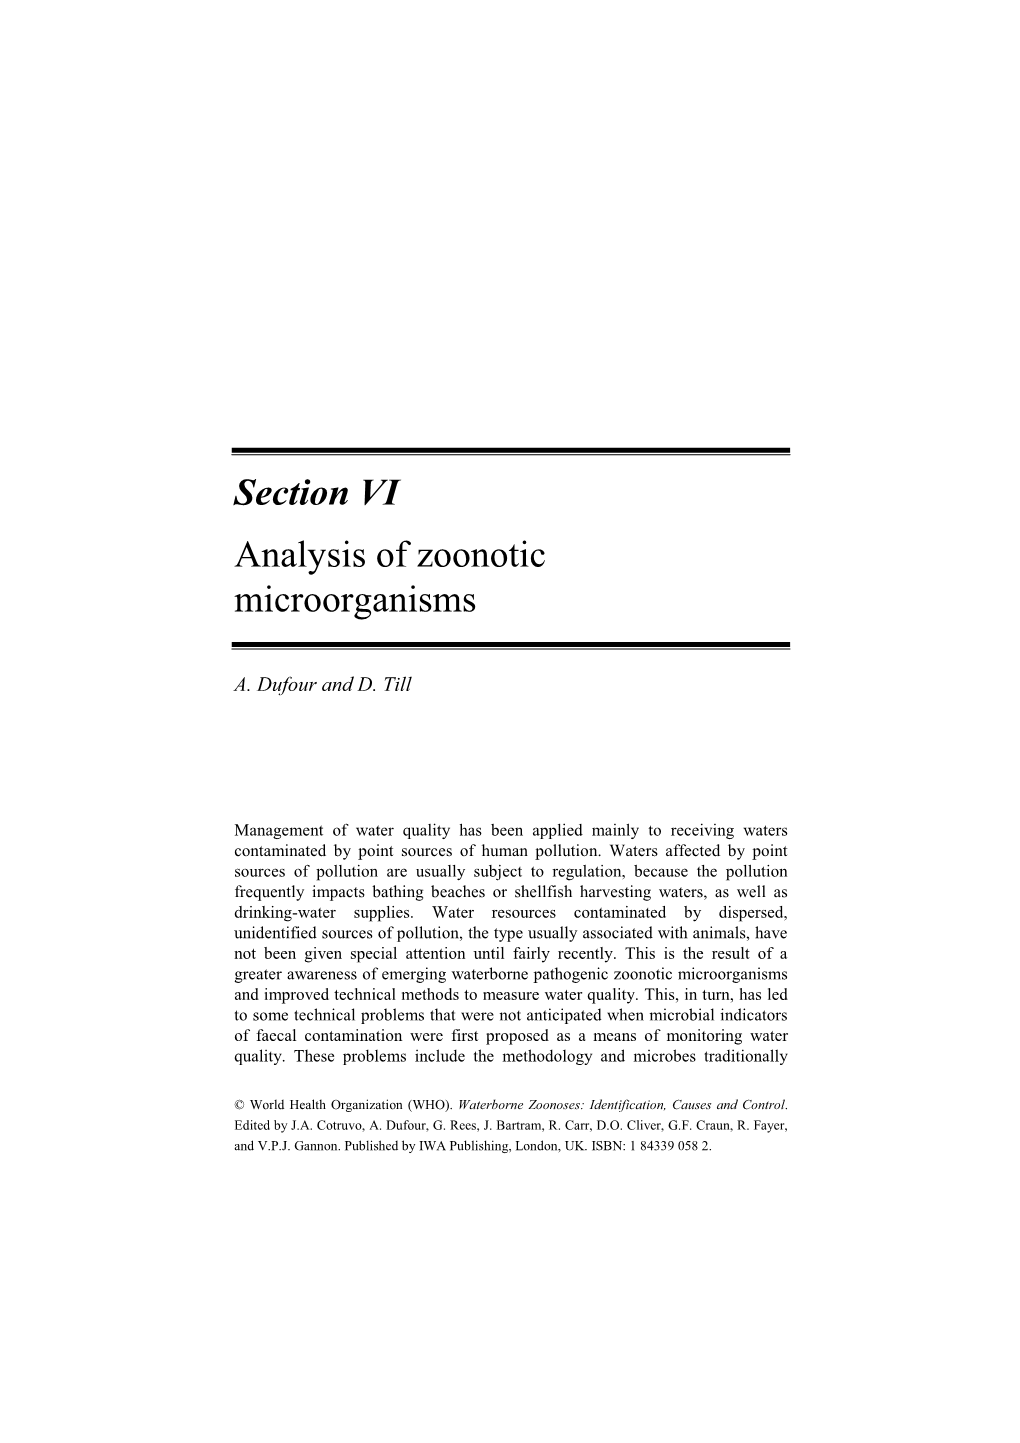 Section VI Analysis of Zoonotic Microorganisms